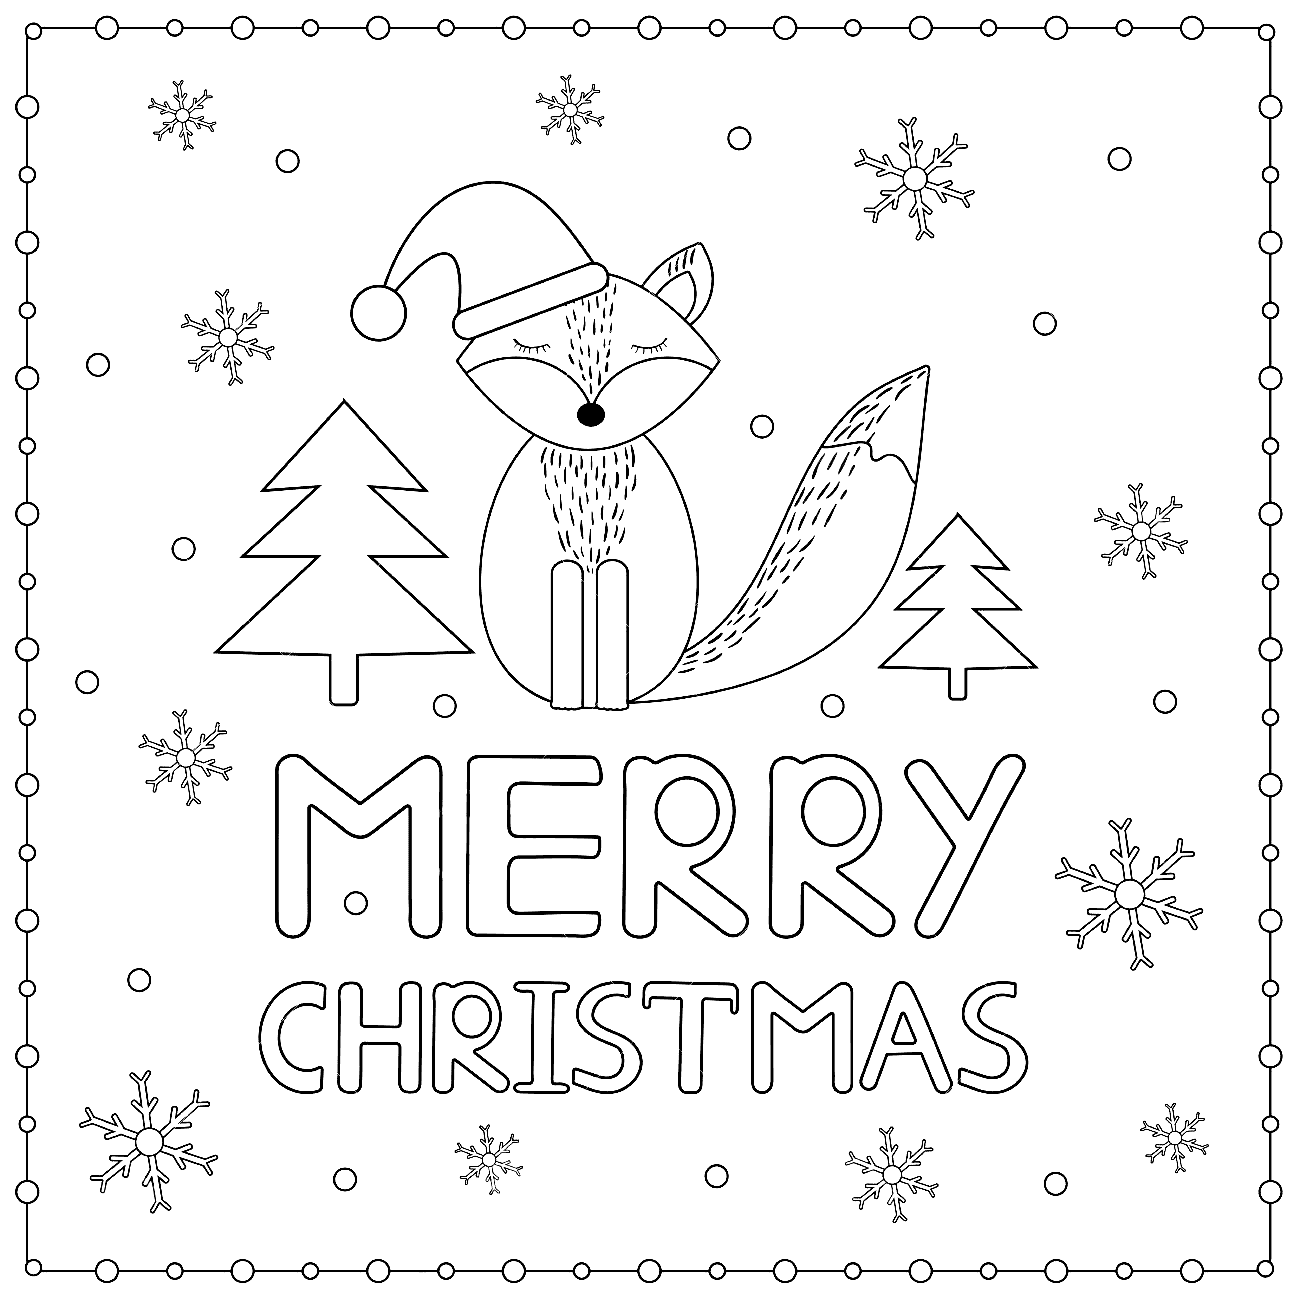 Merry Christmas Card With Snowflakes And Fox